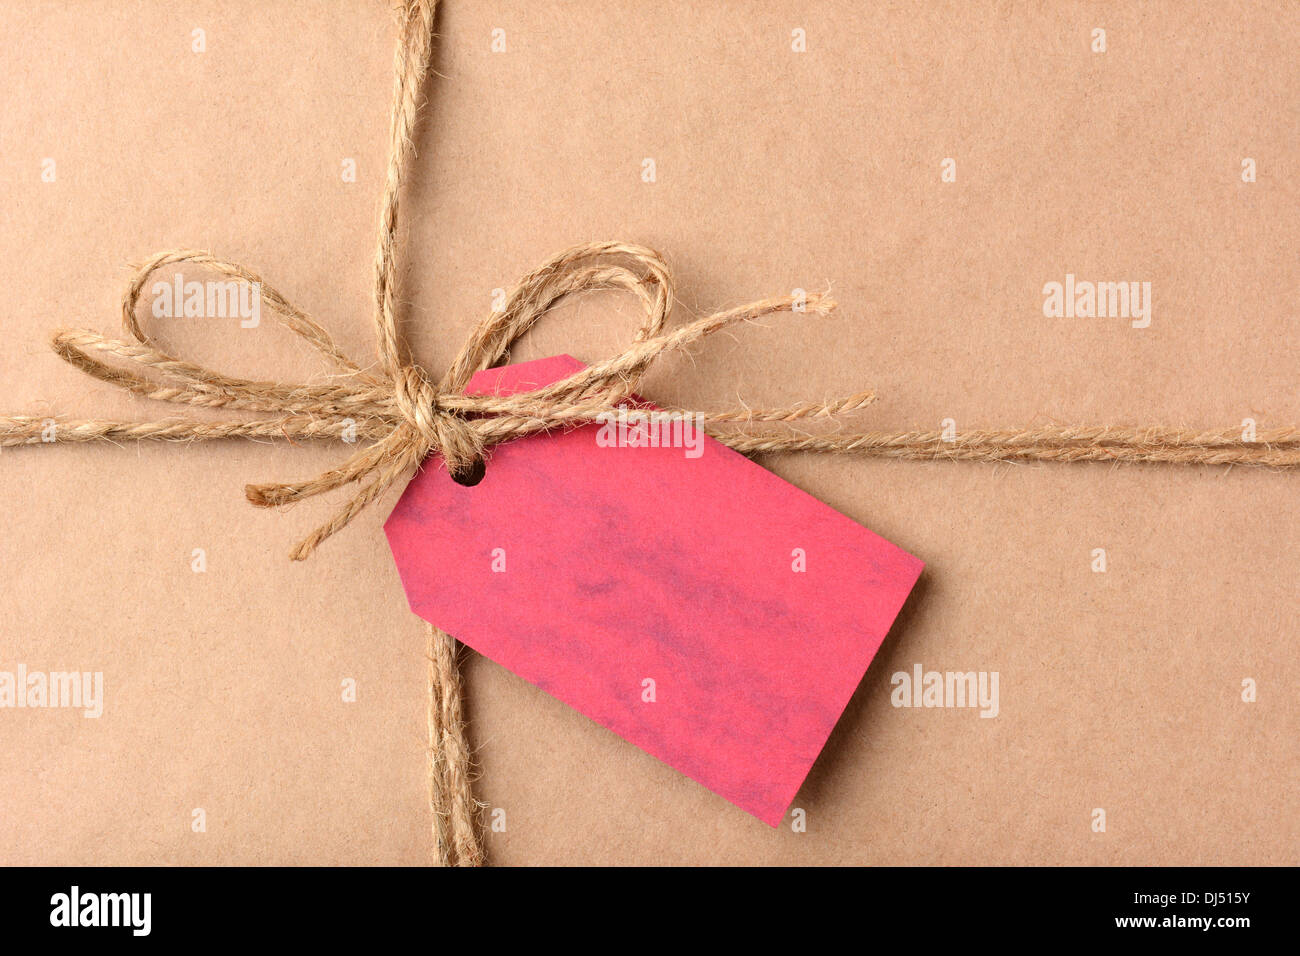 Closeup of a gift tag on a Christmas present. The package is wrapped in plain brown paper and twine. The red tag is blank. Stock Photo